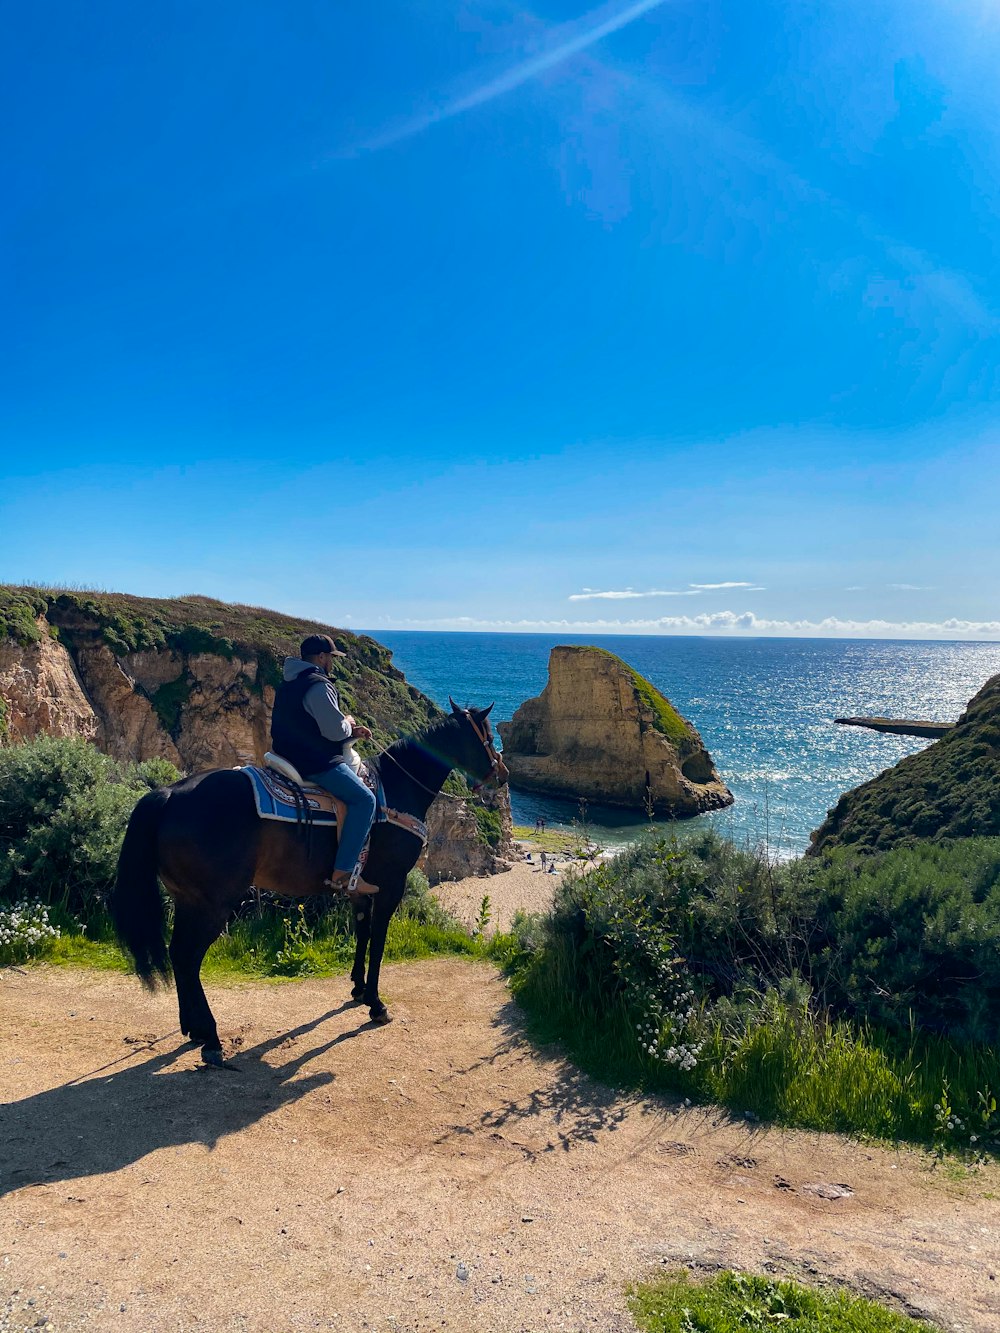 a man riding a horse on a dirt road next to the ocean